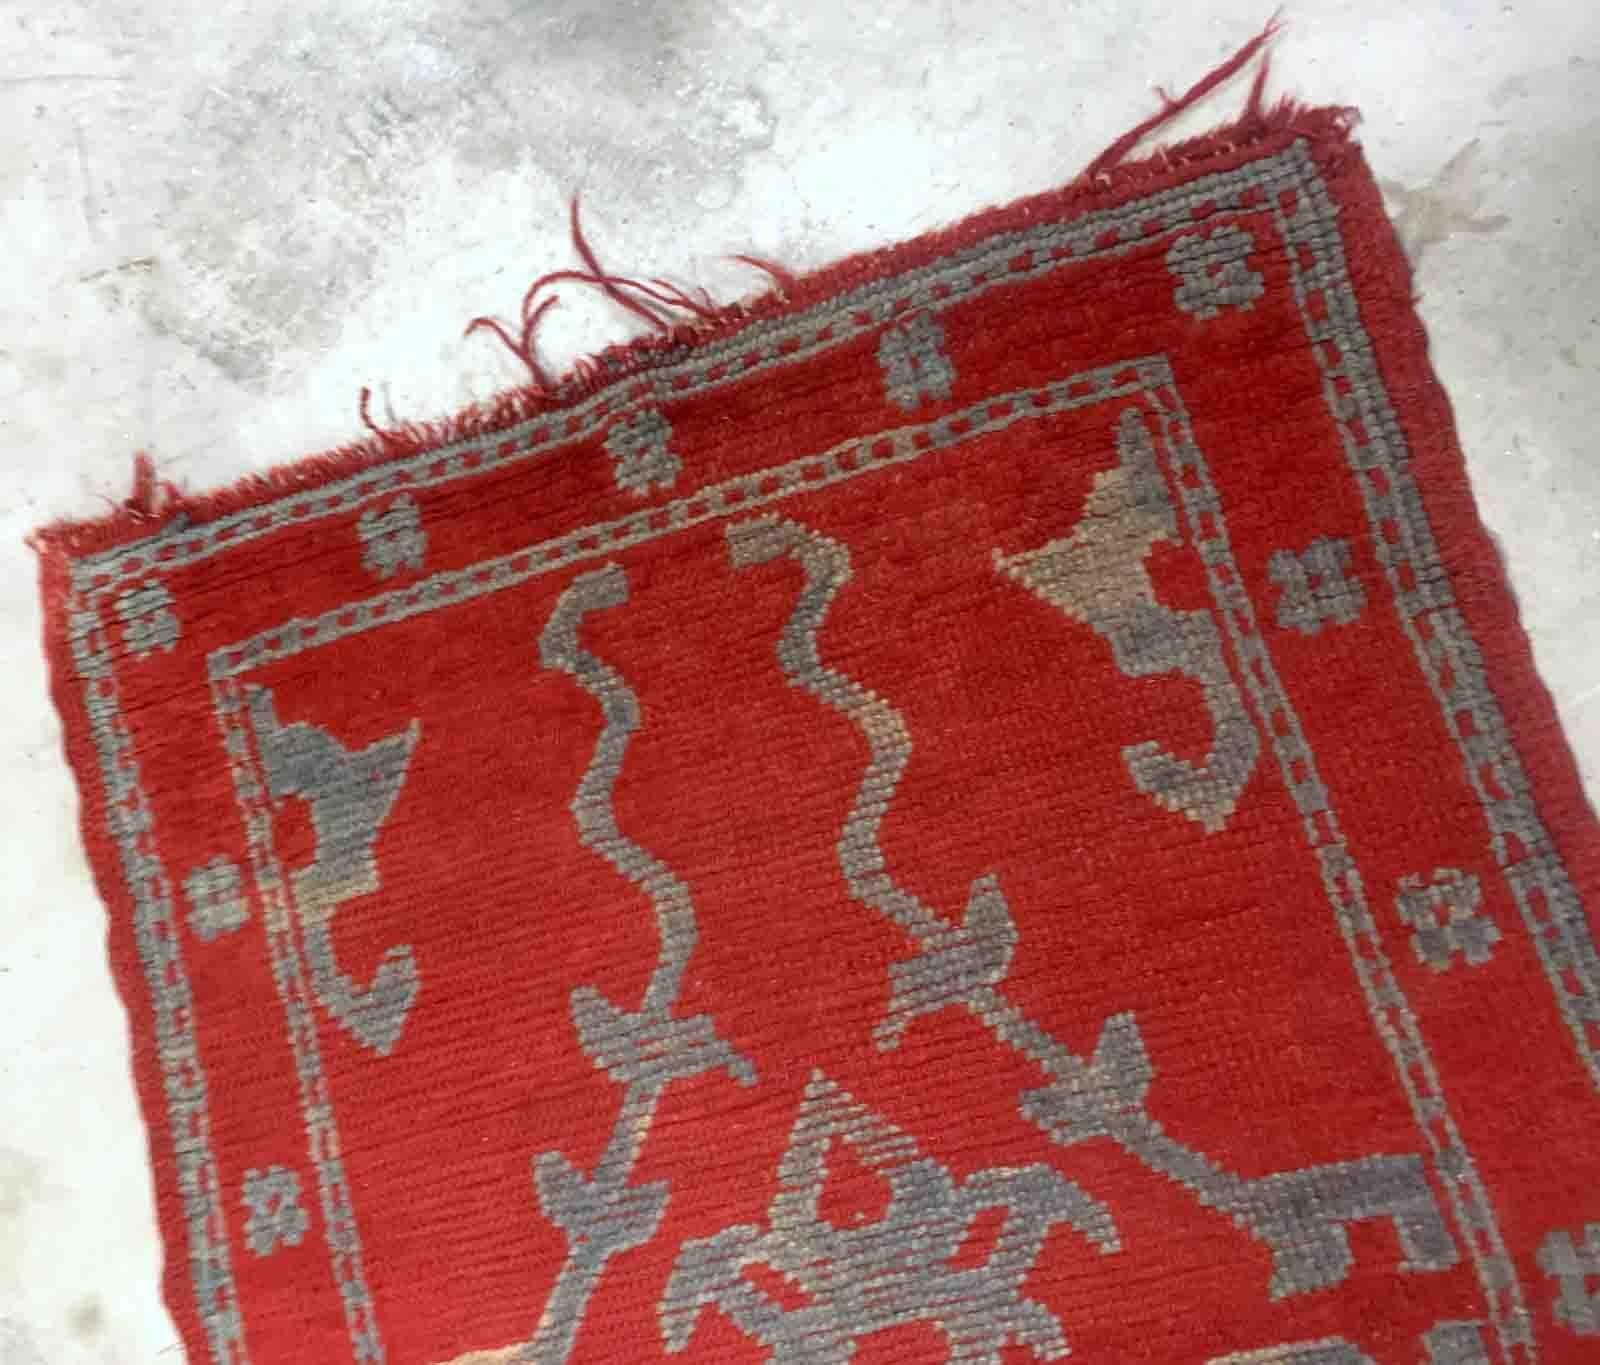 Handmade antique Turkish red rug from Oushak region. The rug is from the end of 19th century in original condition, it has some signs of age.

-condition: original, some signs of age,

-circa: 1880s,

-size: 3' x 4.9' (91cm x